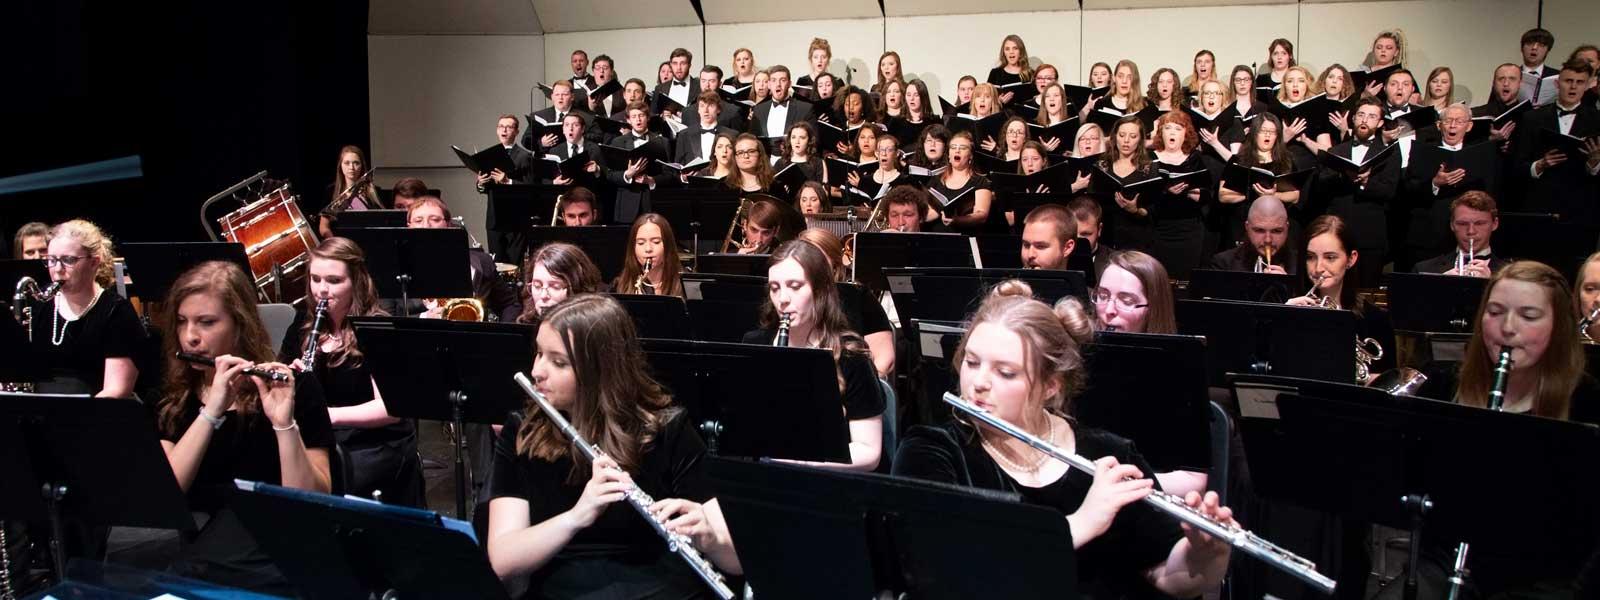 Choral and instrumental ensembles perform together